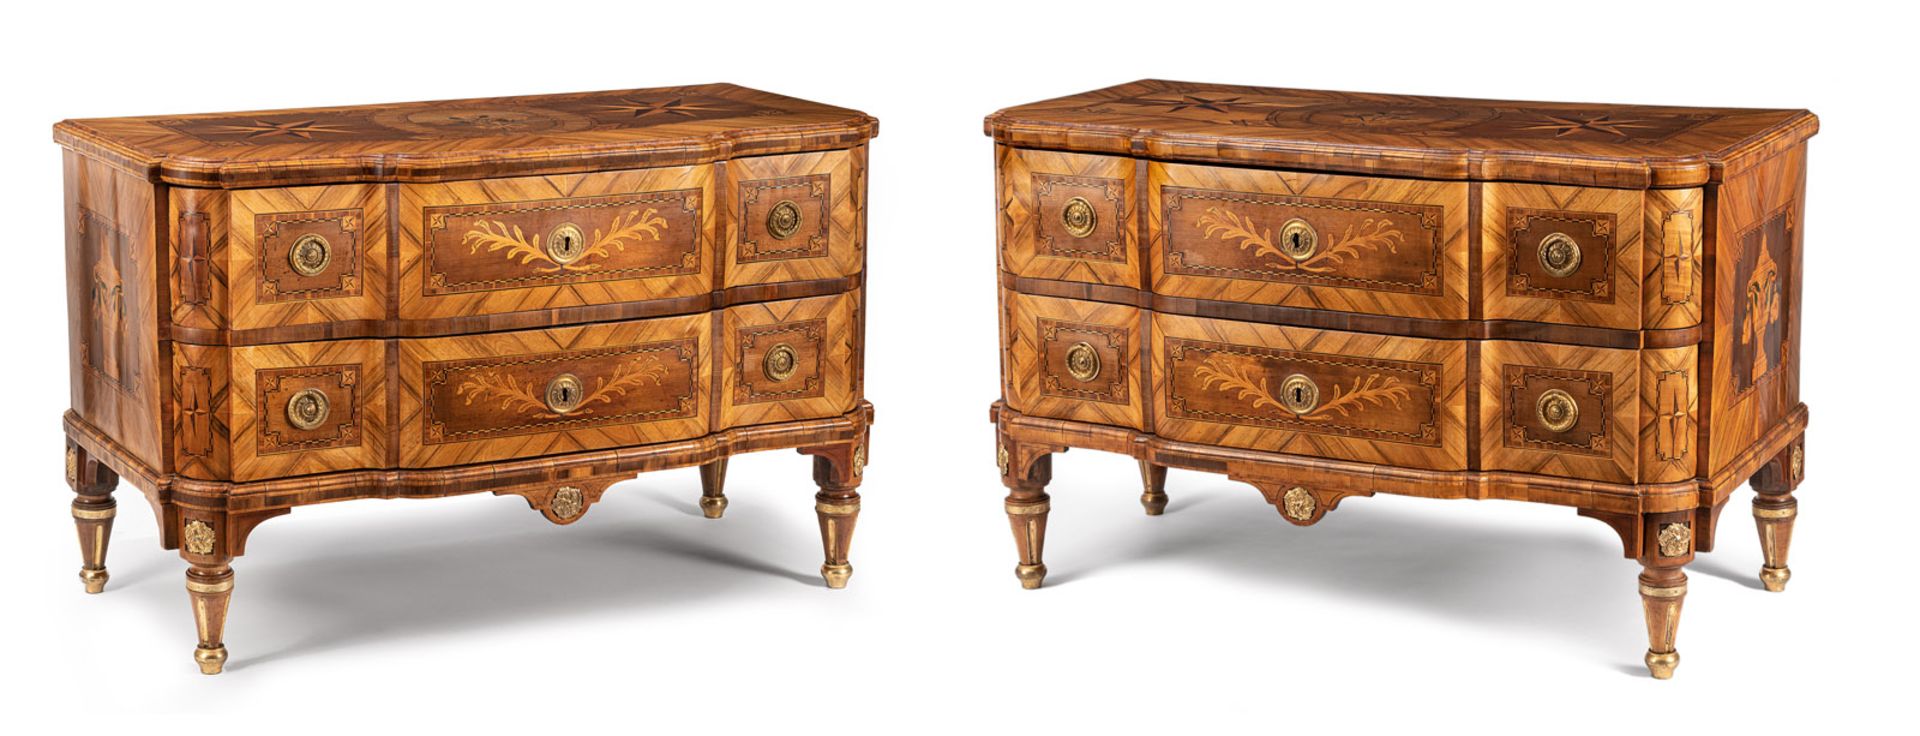 A RARE PAIR OF BRONZE AND BRASS MOUNTED  WALNUT, KING WOOD AND TULIP WOOD MARQUETRIED EMPIRE COMMOD